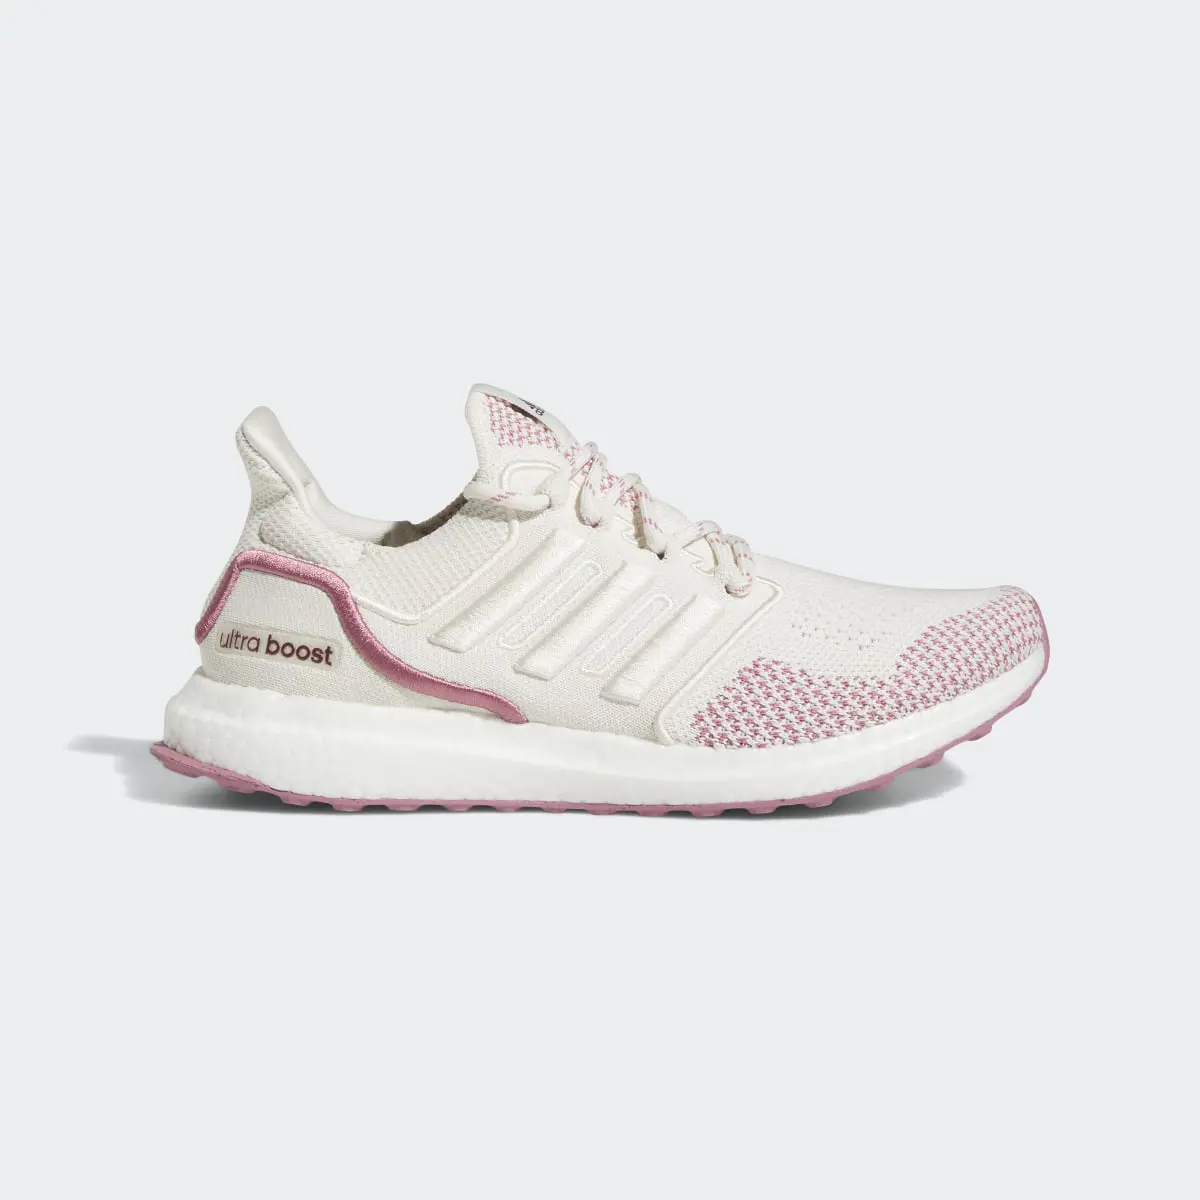 Adidas Ultraboost 1 LCFP Shoes. 2